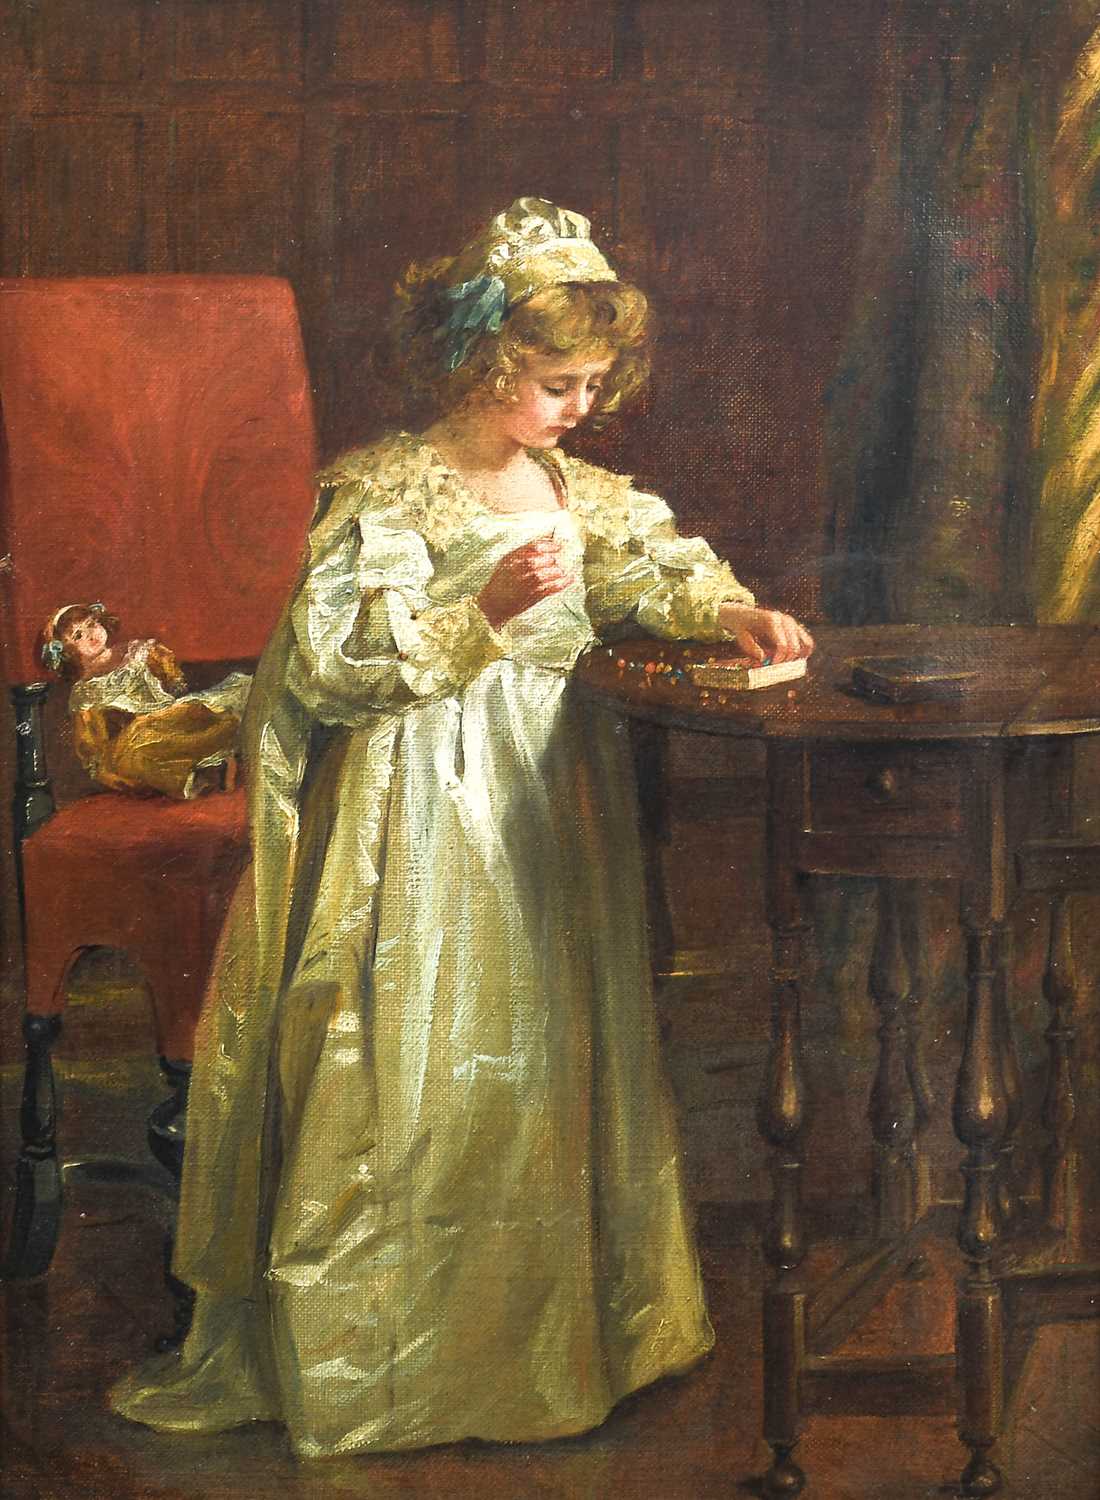 British School (Later 19th Century) Stringing a necklace - young lady standing in an interior